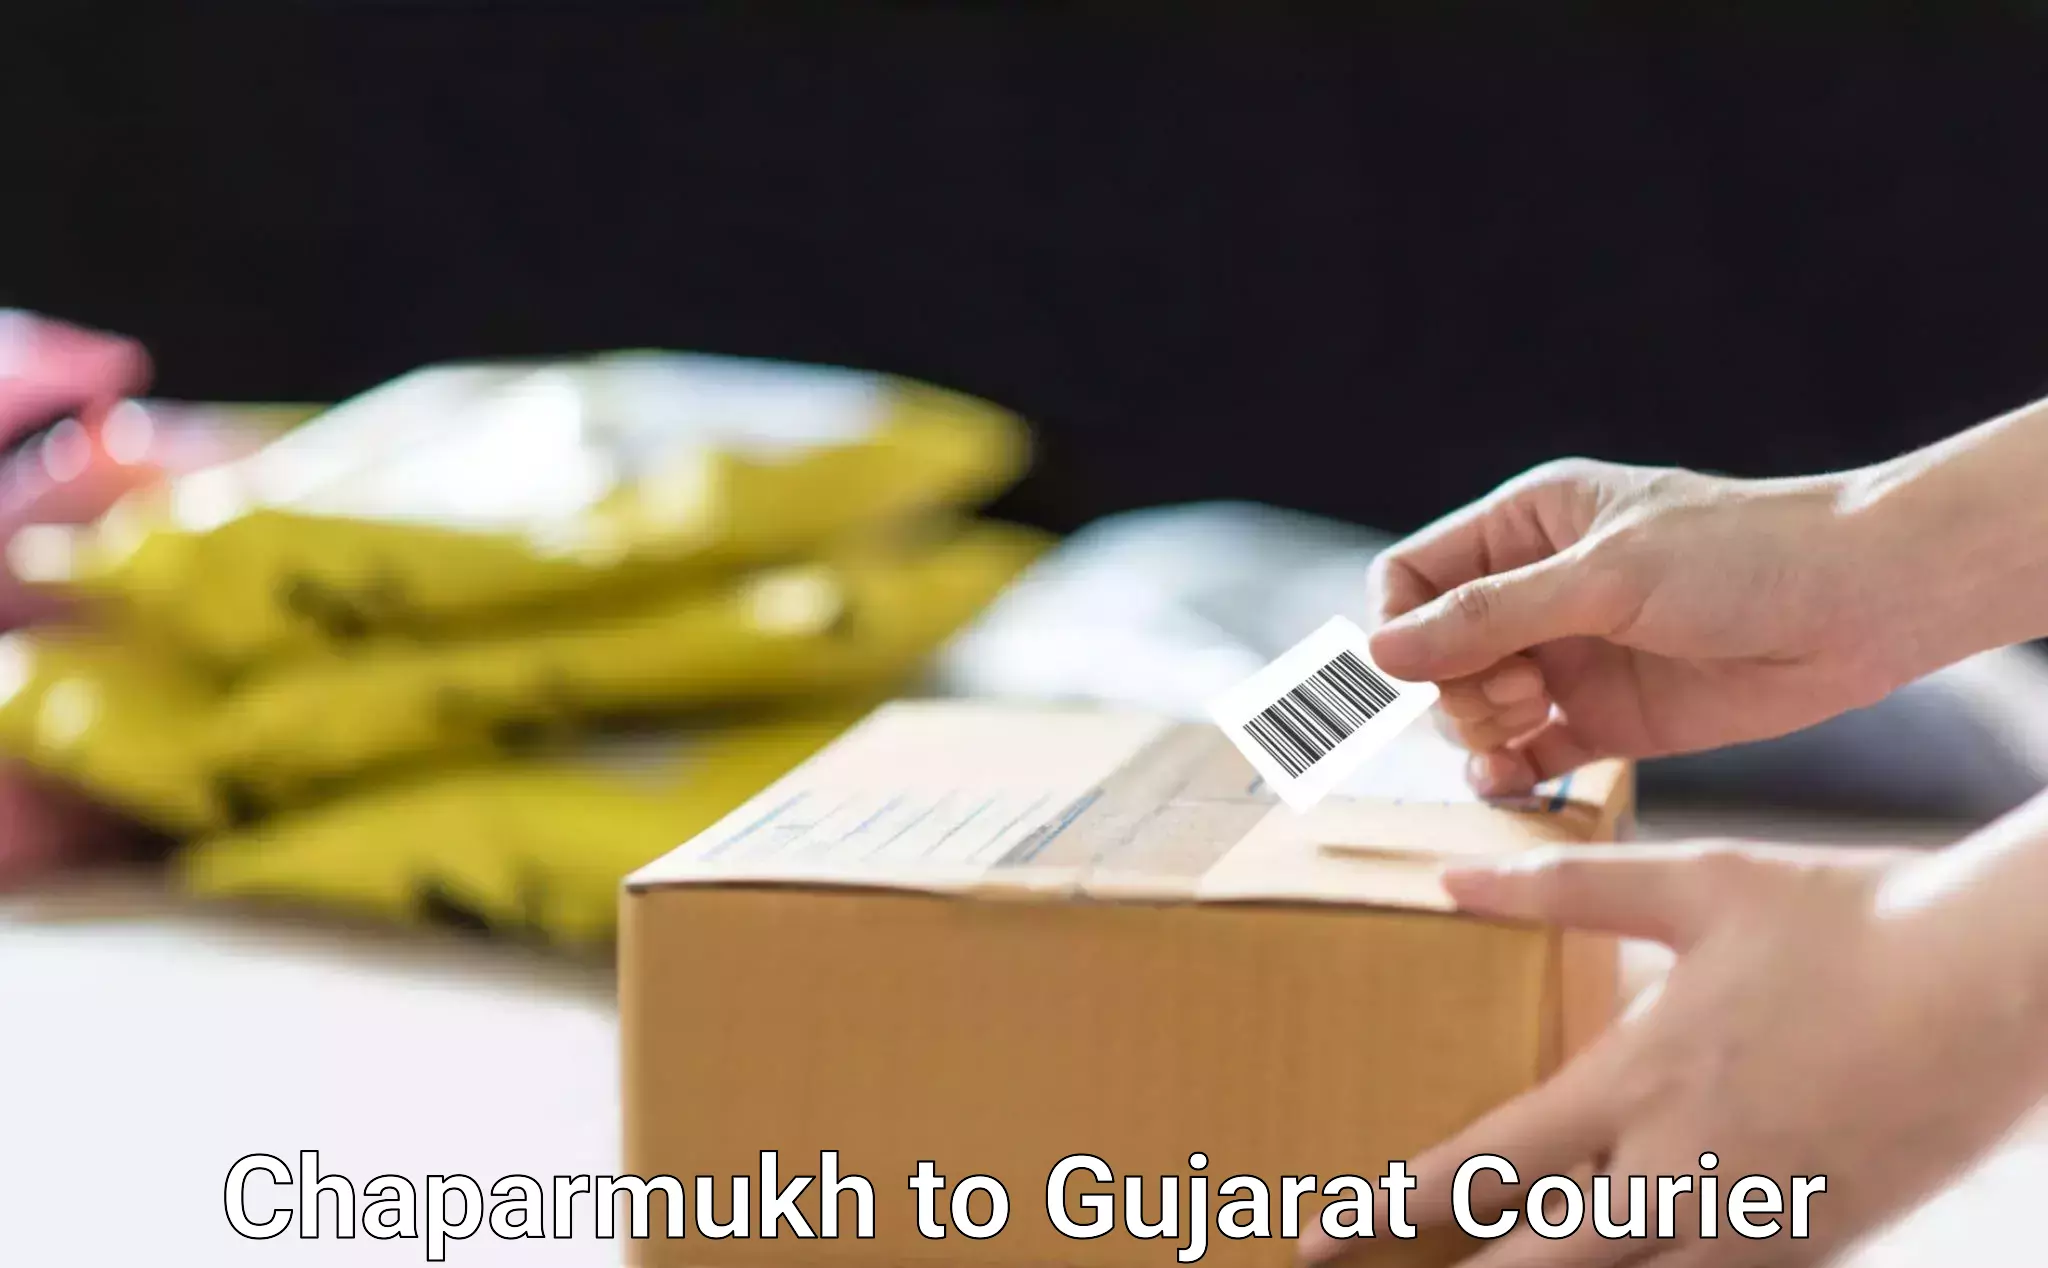 Courier dispatch services Chaparmukh to Morbi